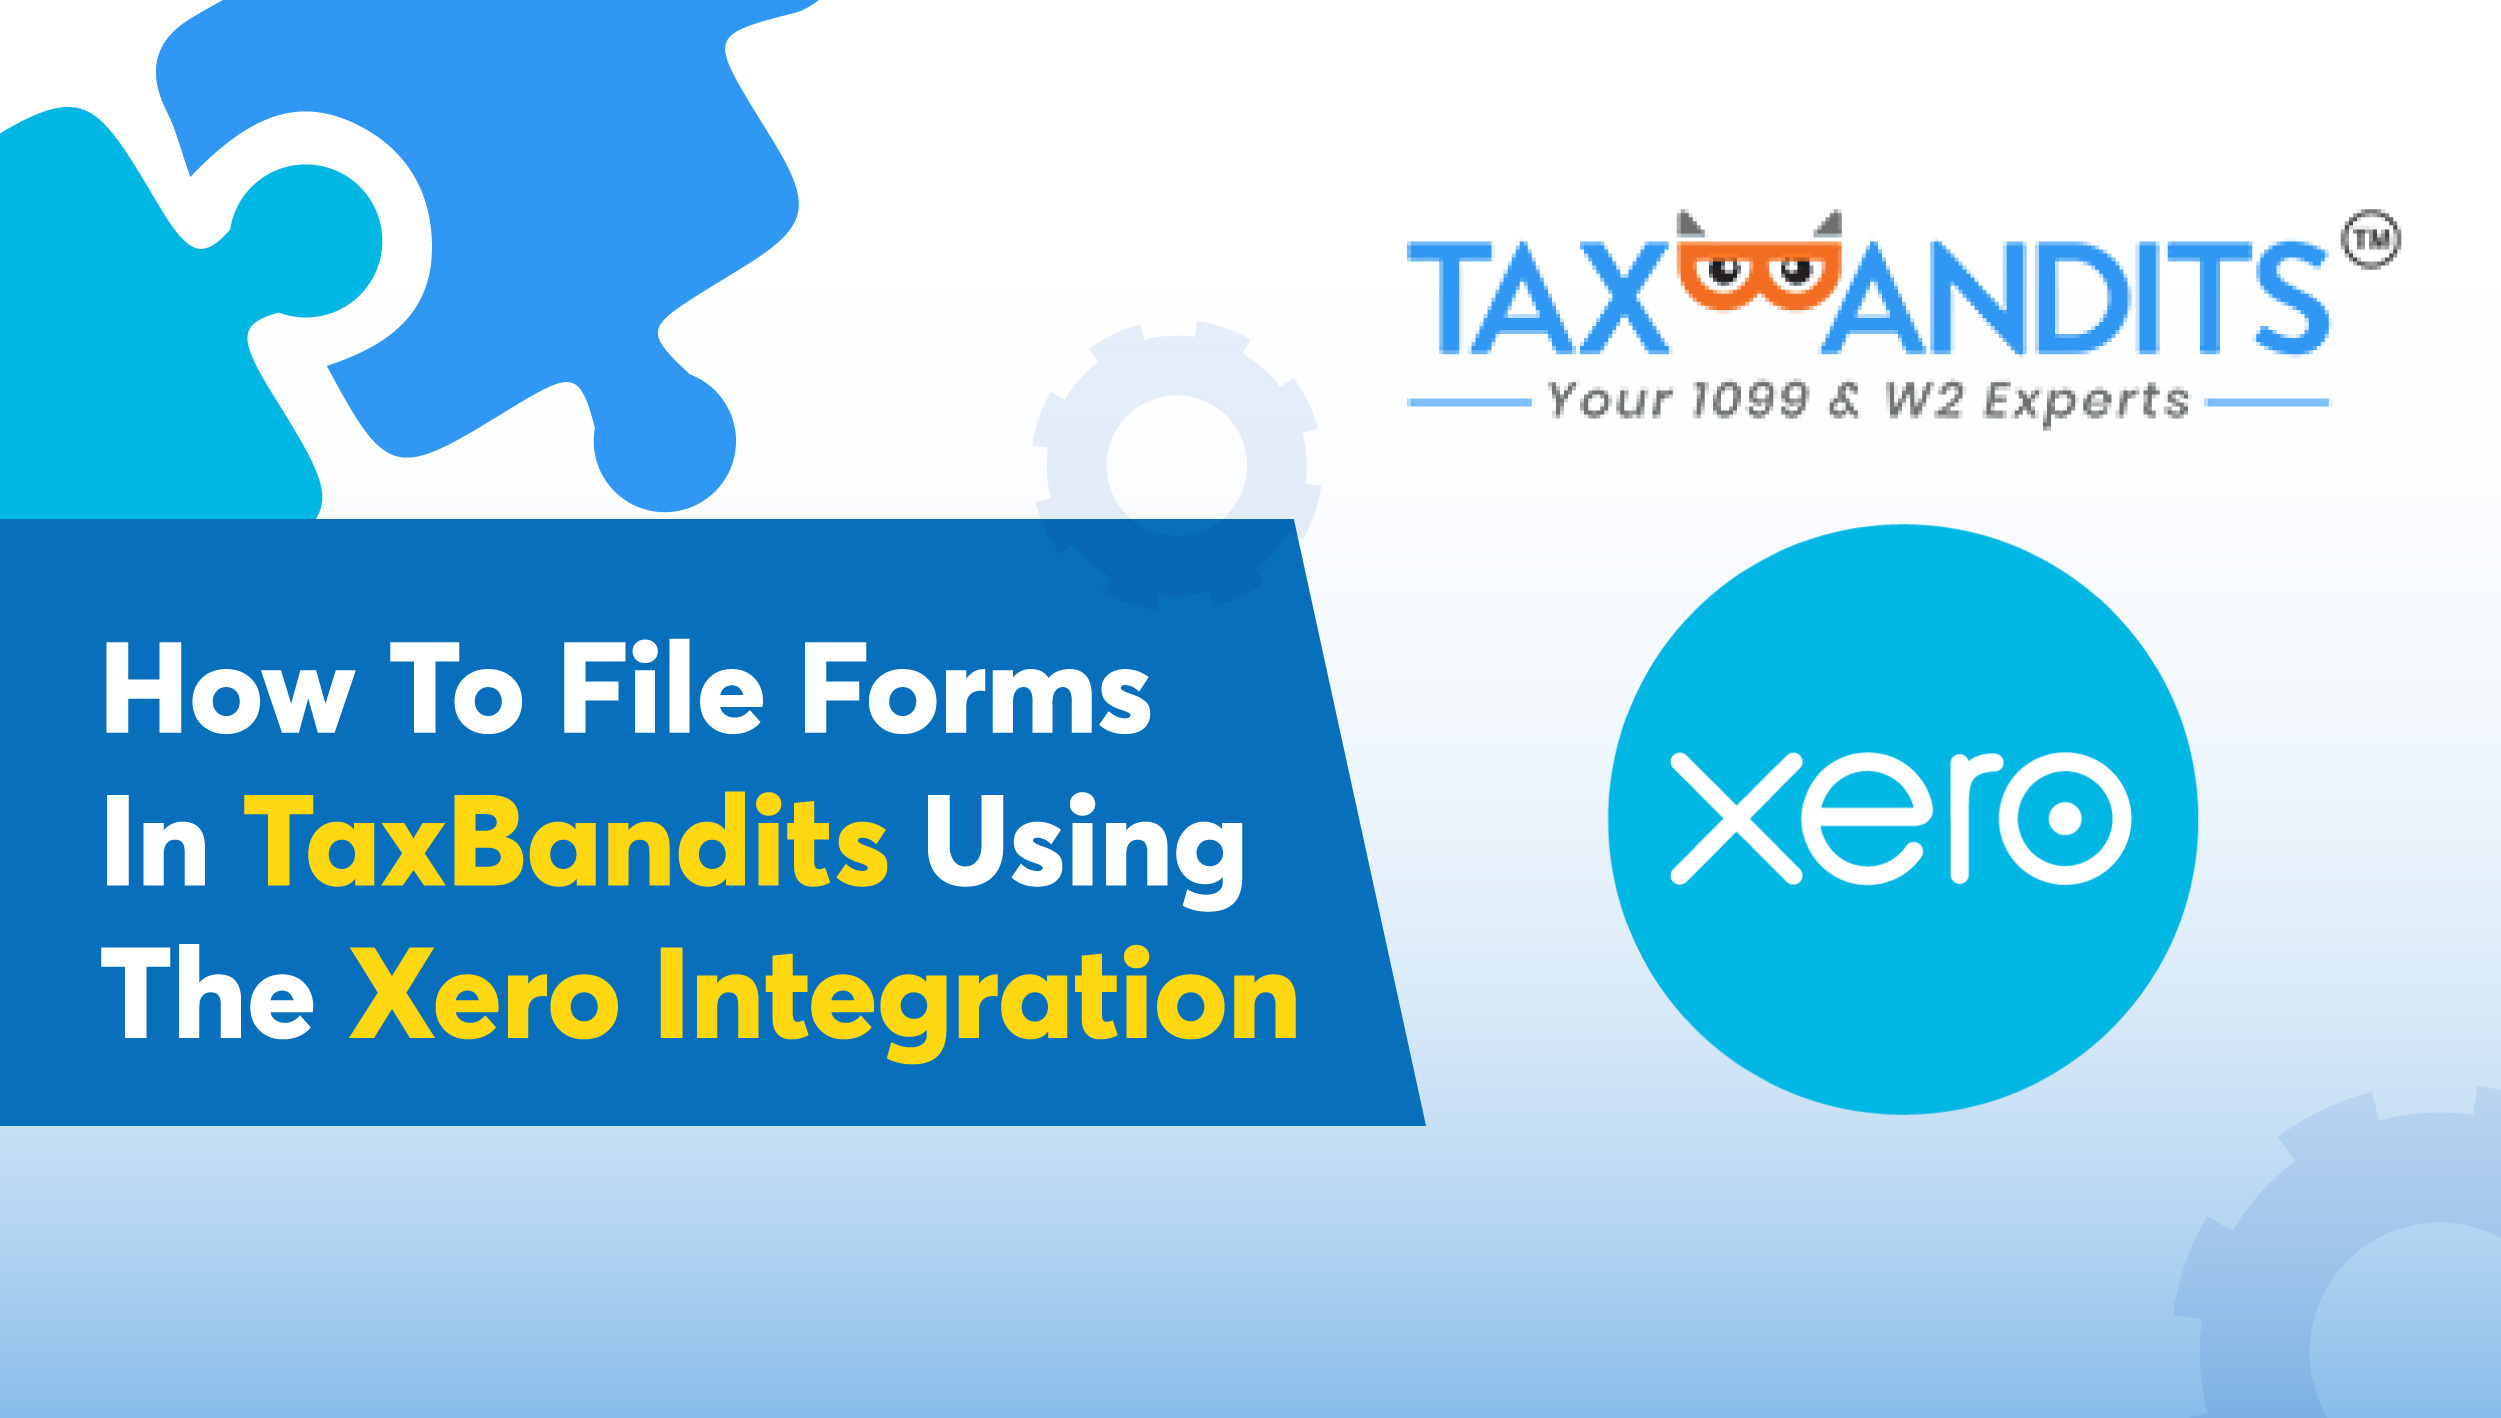 How To File Forms In TaxBandits Using The Xero Integration